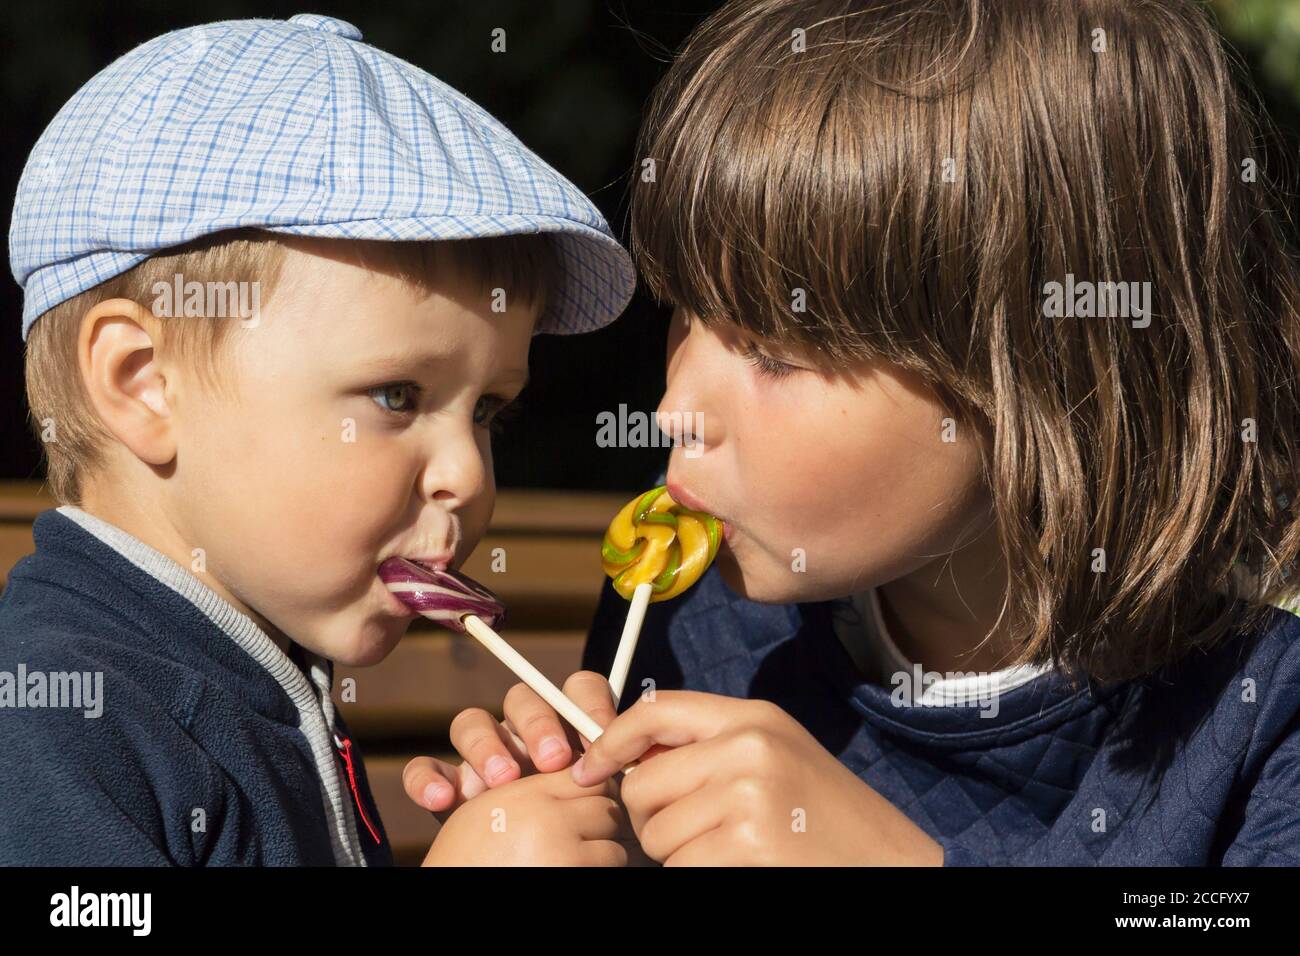 Boy and girl eating a delicious Lollipop.Cute boy licking Lollipop. Stock Photo